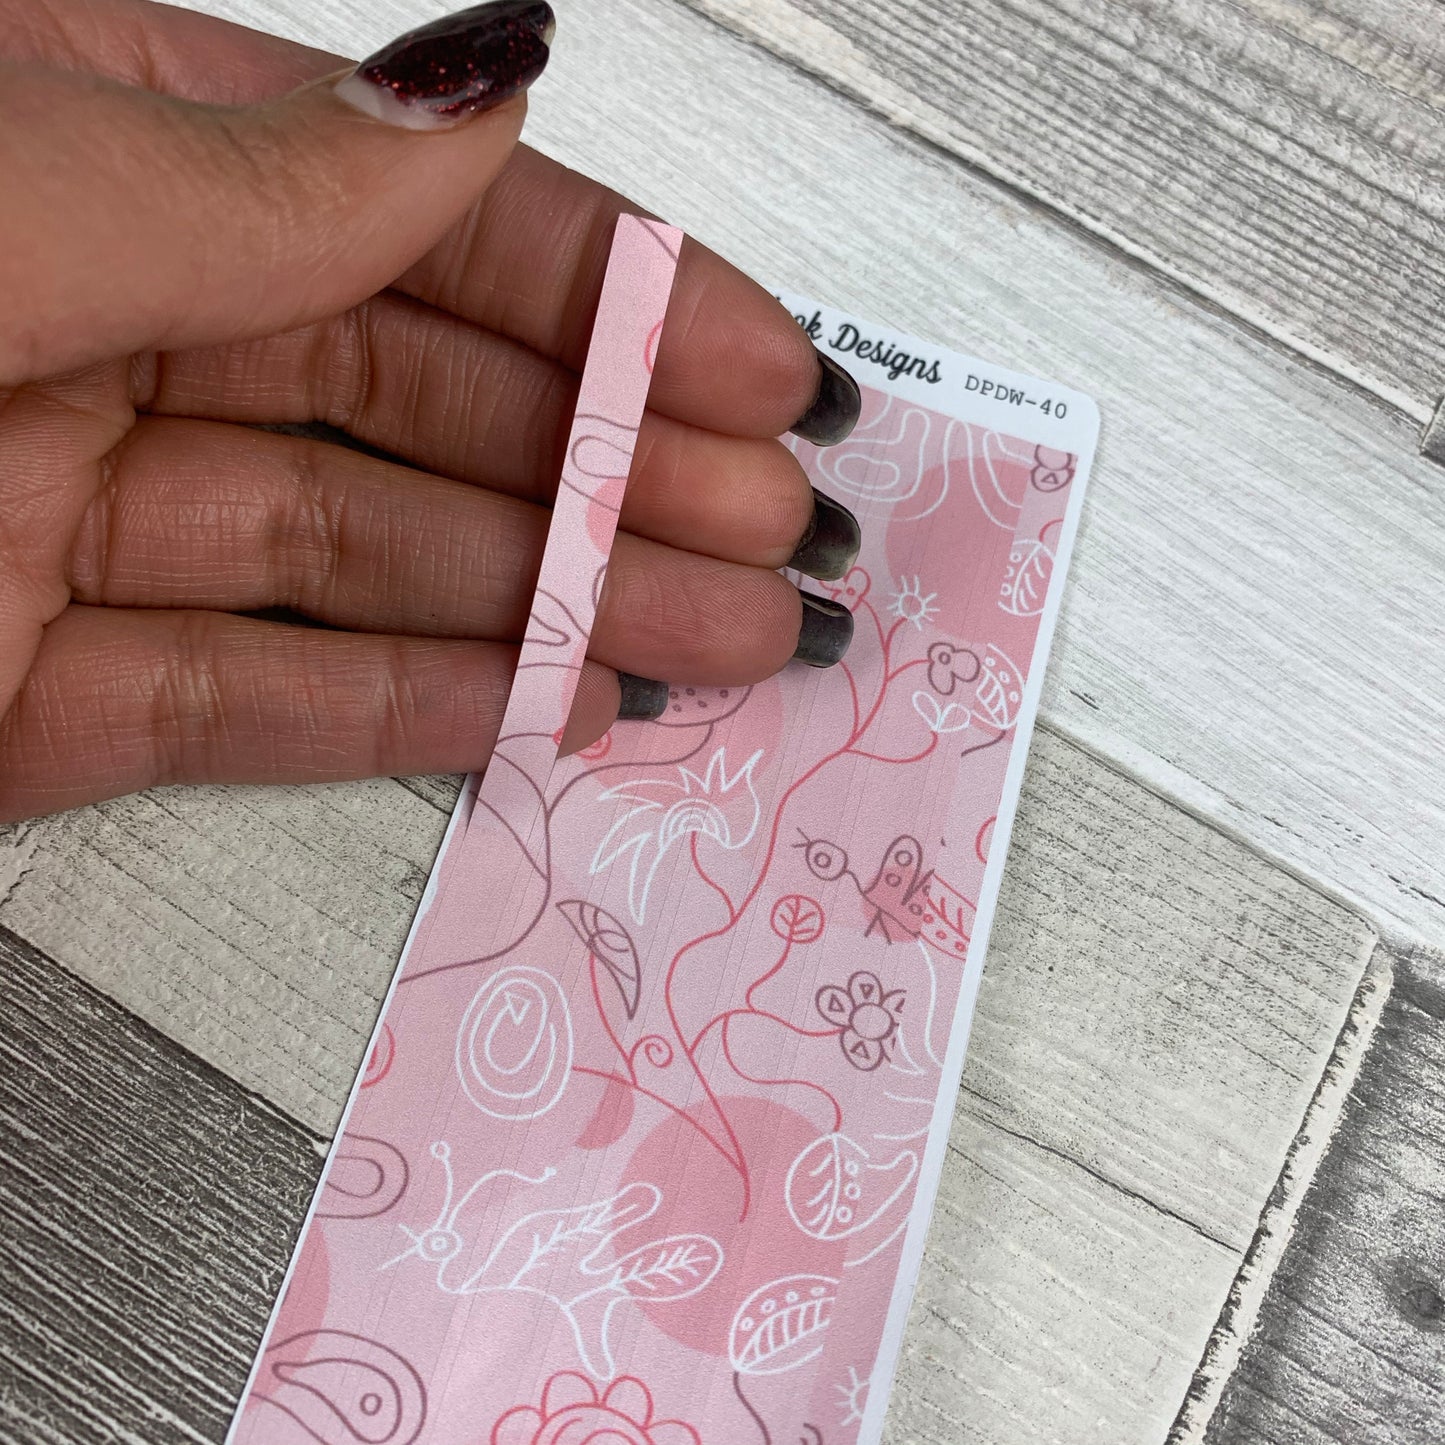 Passion Planner Hour Cover up / Washi strip stickers Pink Foliage (DPDW-40)